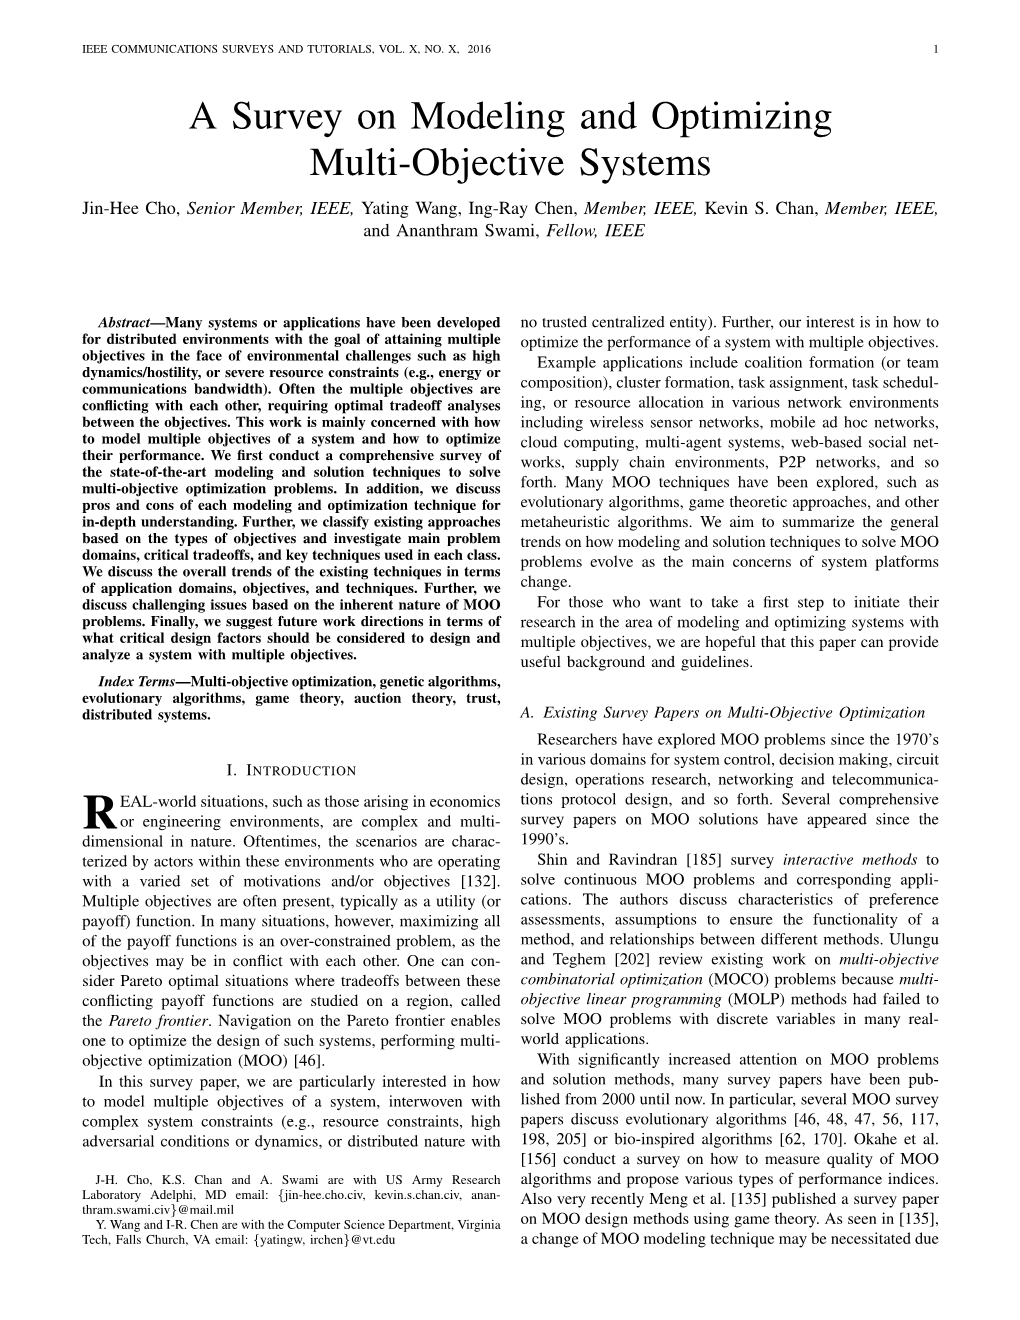 A Survey on Modeling and Optimizing Multi-Objective Systems Jin-Hee Cho, Senior Member, IEEE, Yating Wang, Ing-Ray Chen, Member, IEEE, Kevin S